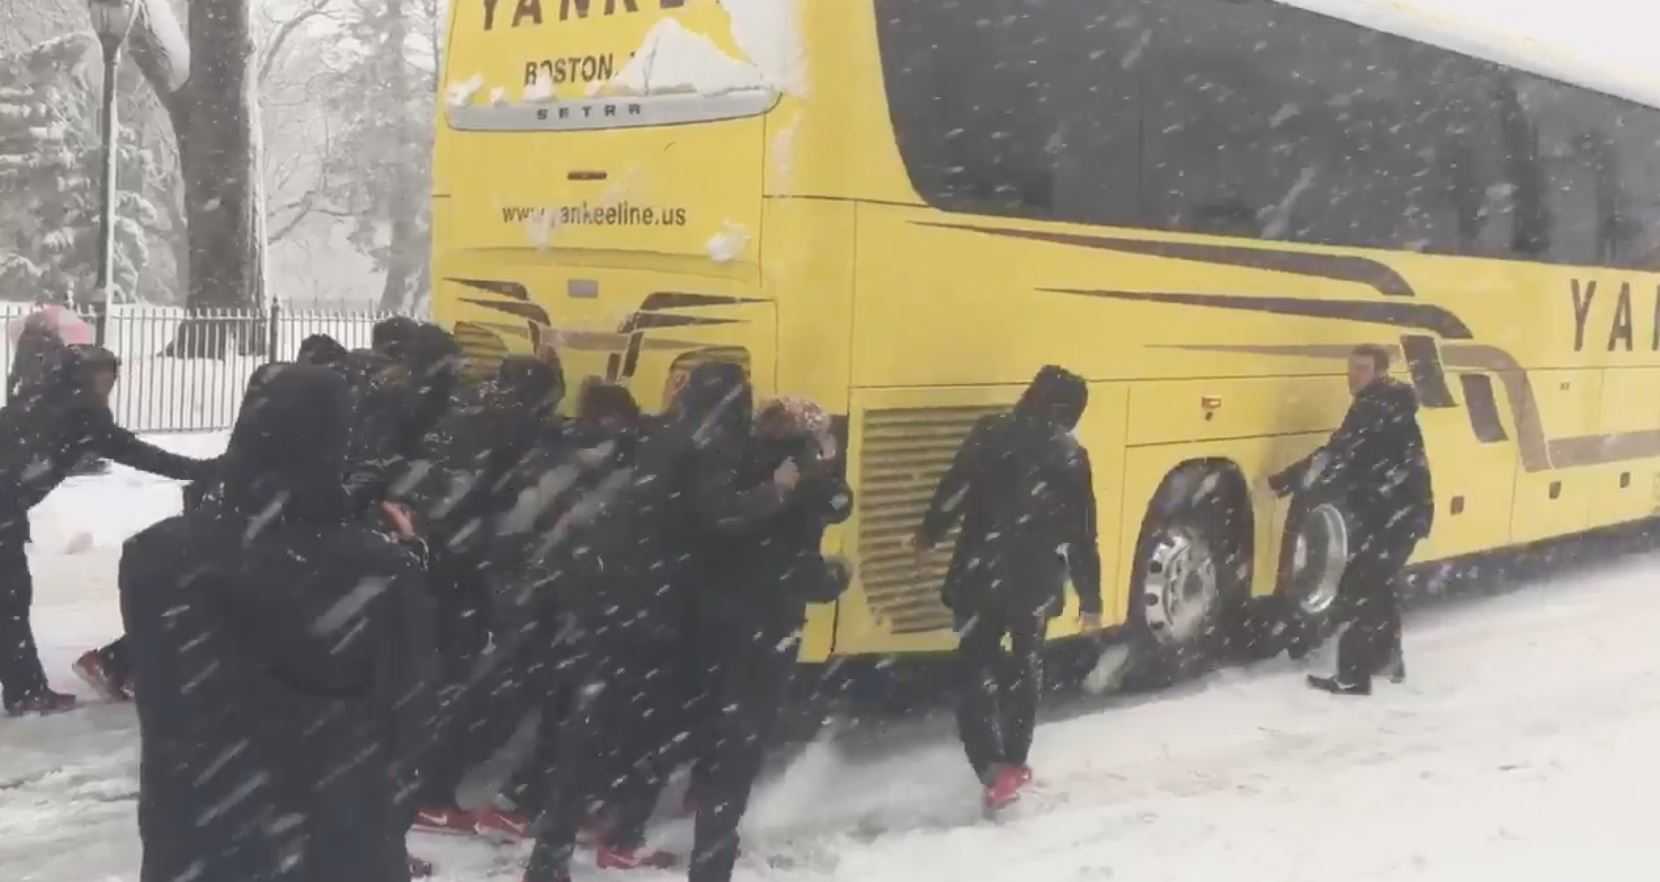 Northeastern women's basketball team pushes bus out of snow